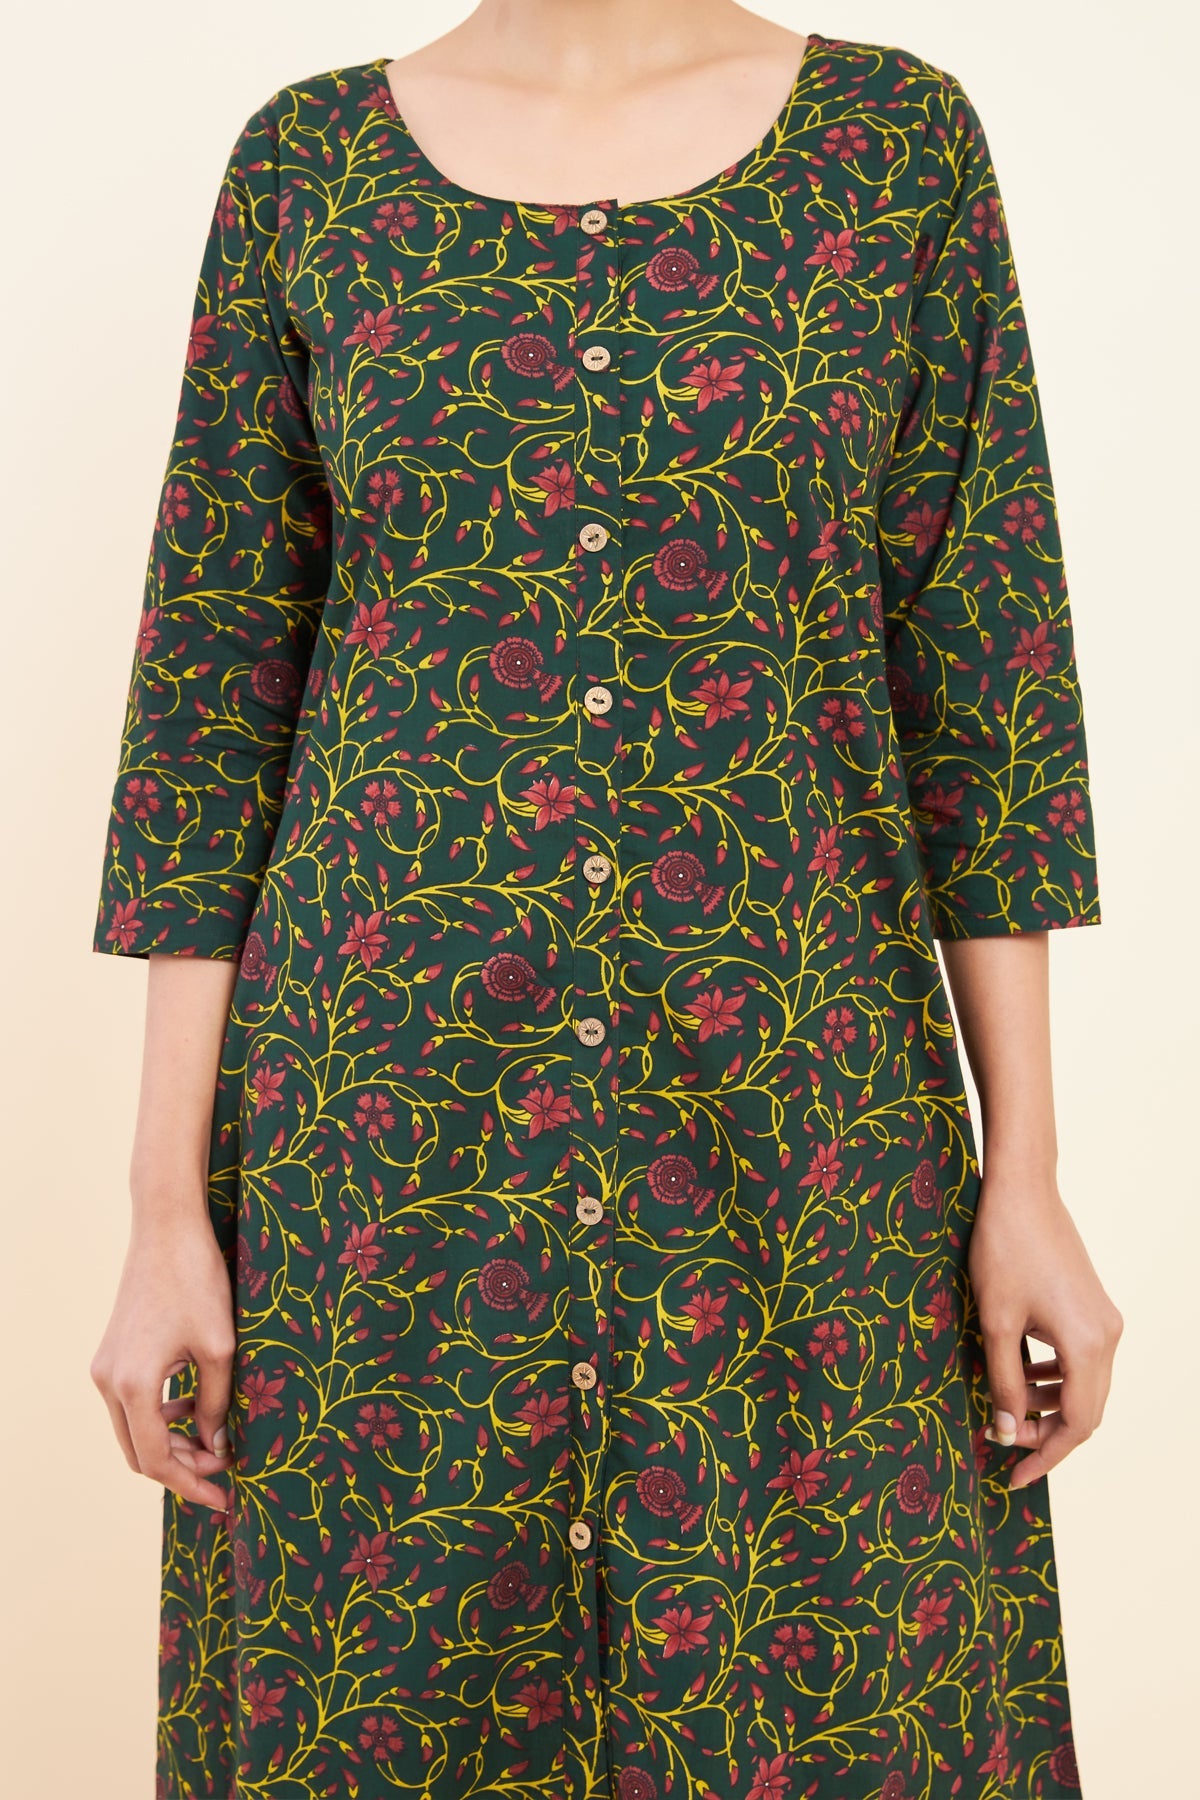 All Over Floral & Scroll Printed Kurta - Green